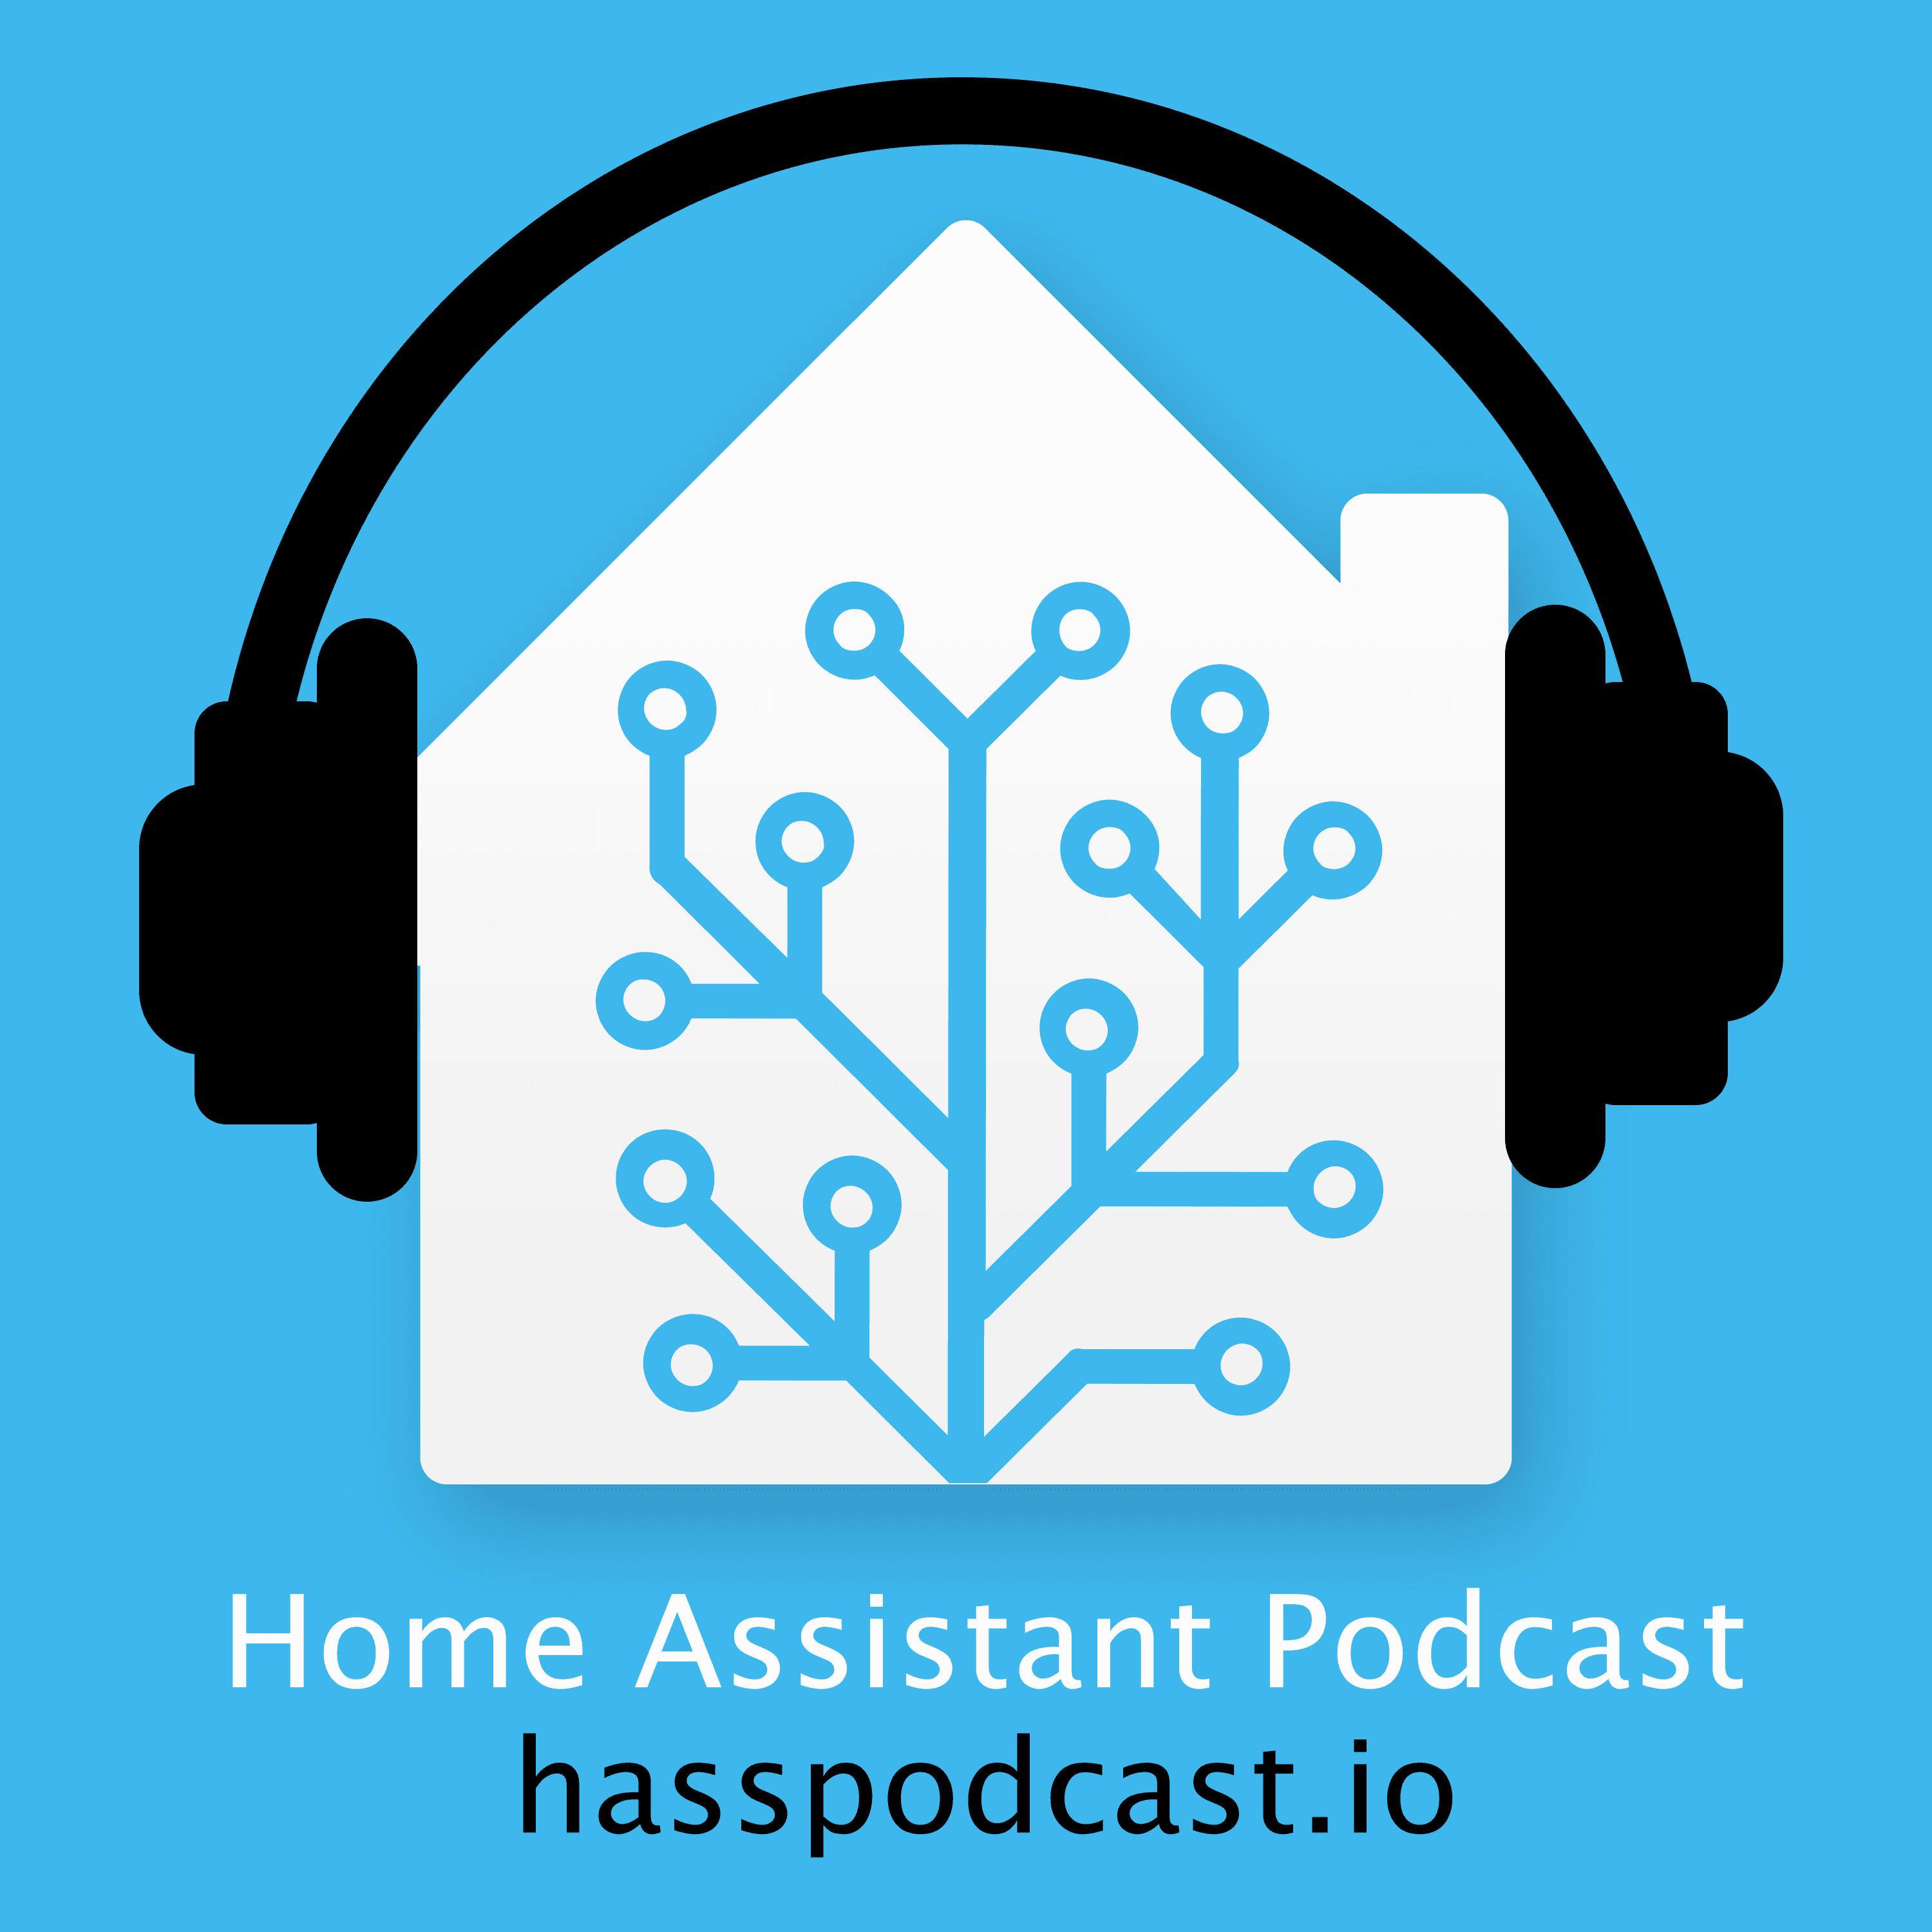 Home Assistant Podcast